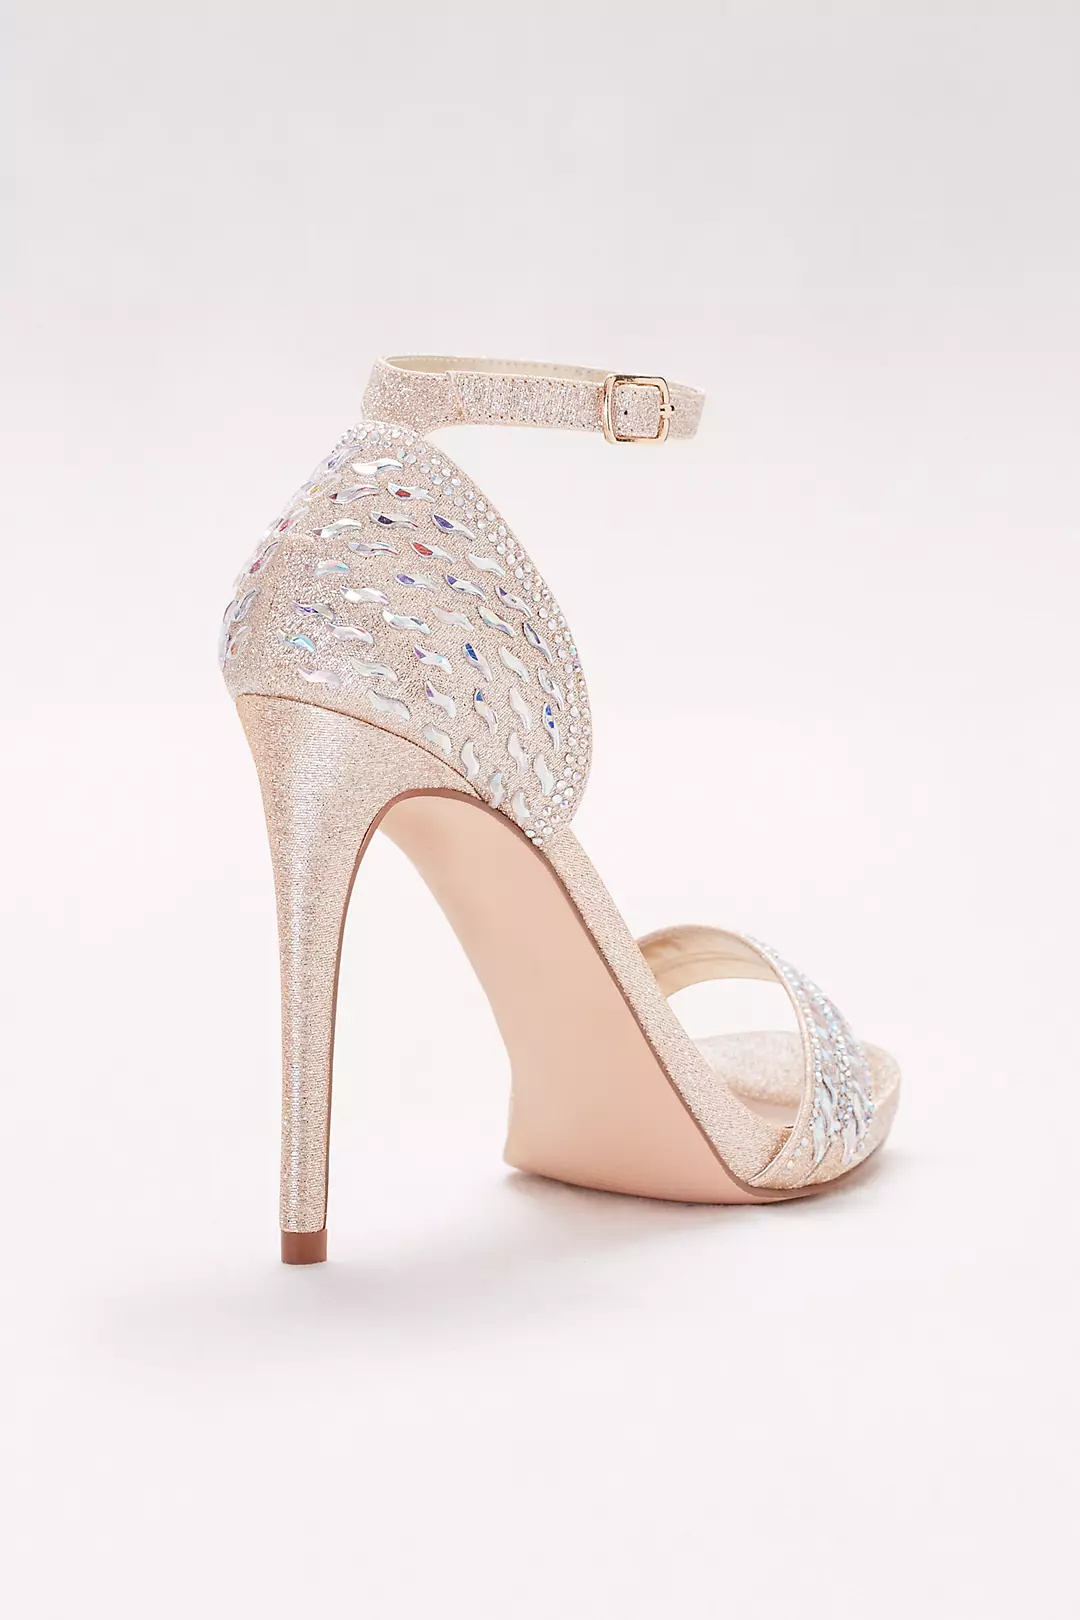 Metallic Ankle-Strap Sandals with Iridescent Gems Image 2